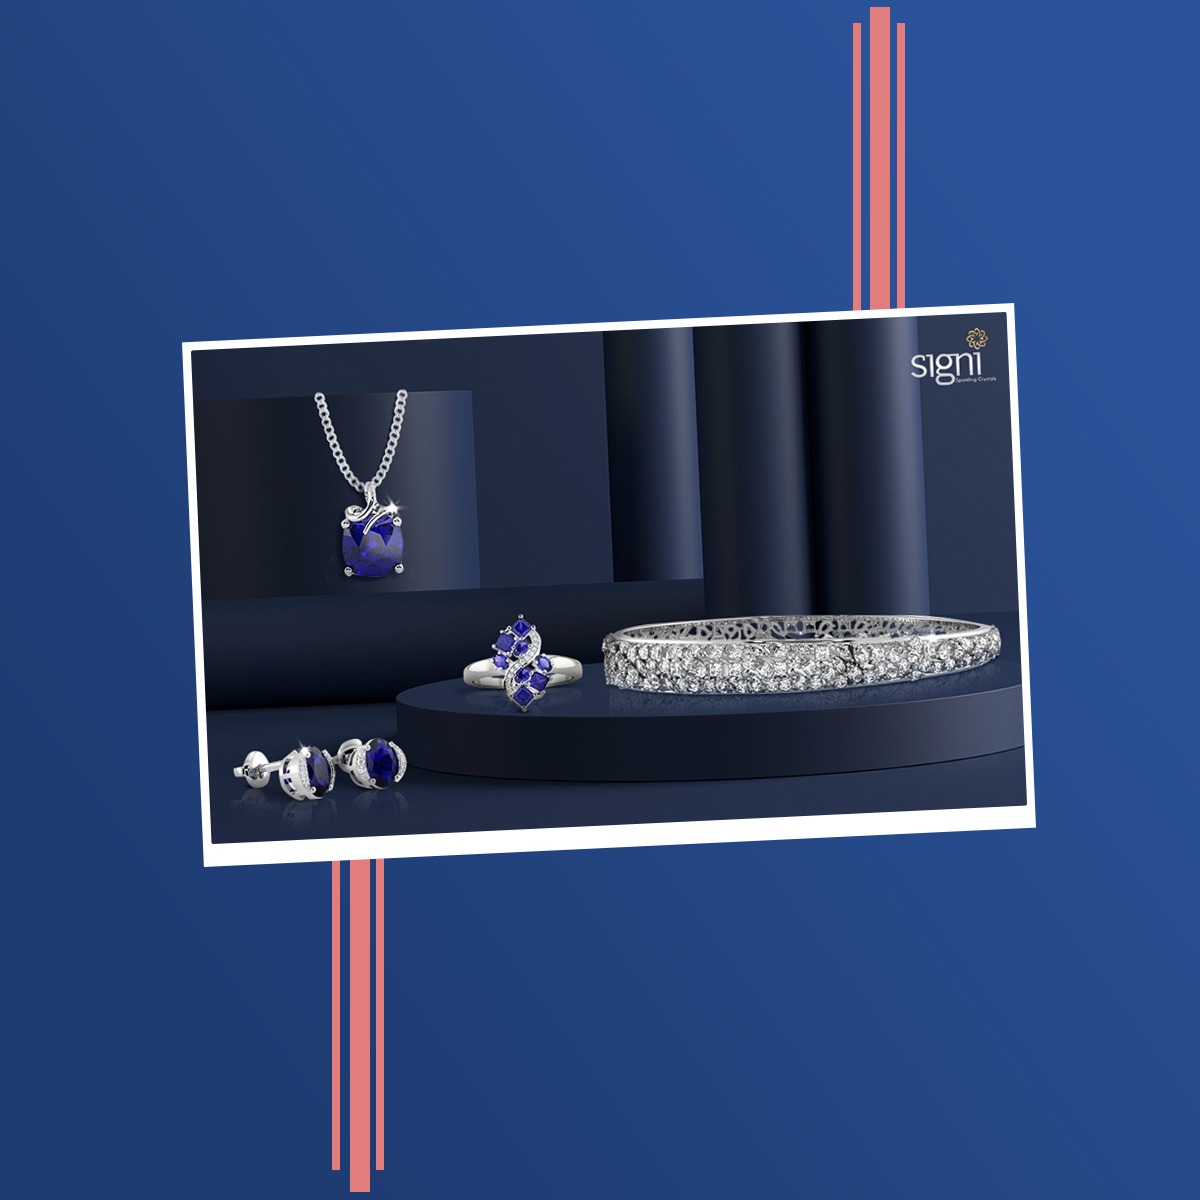 Celebrate your uniqueness with exclusive jewellery collections from Signi!